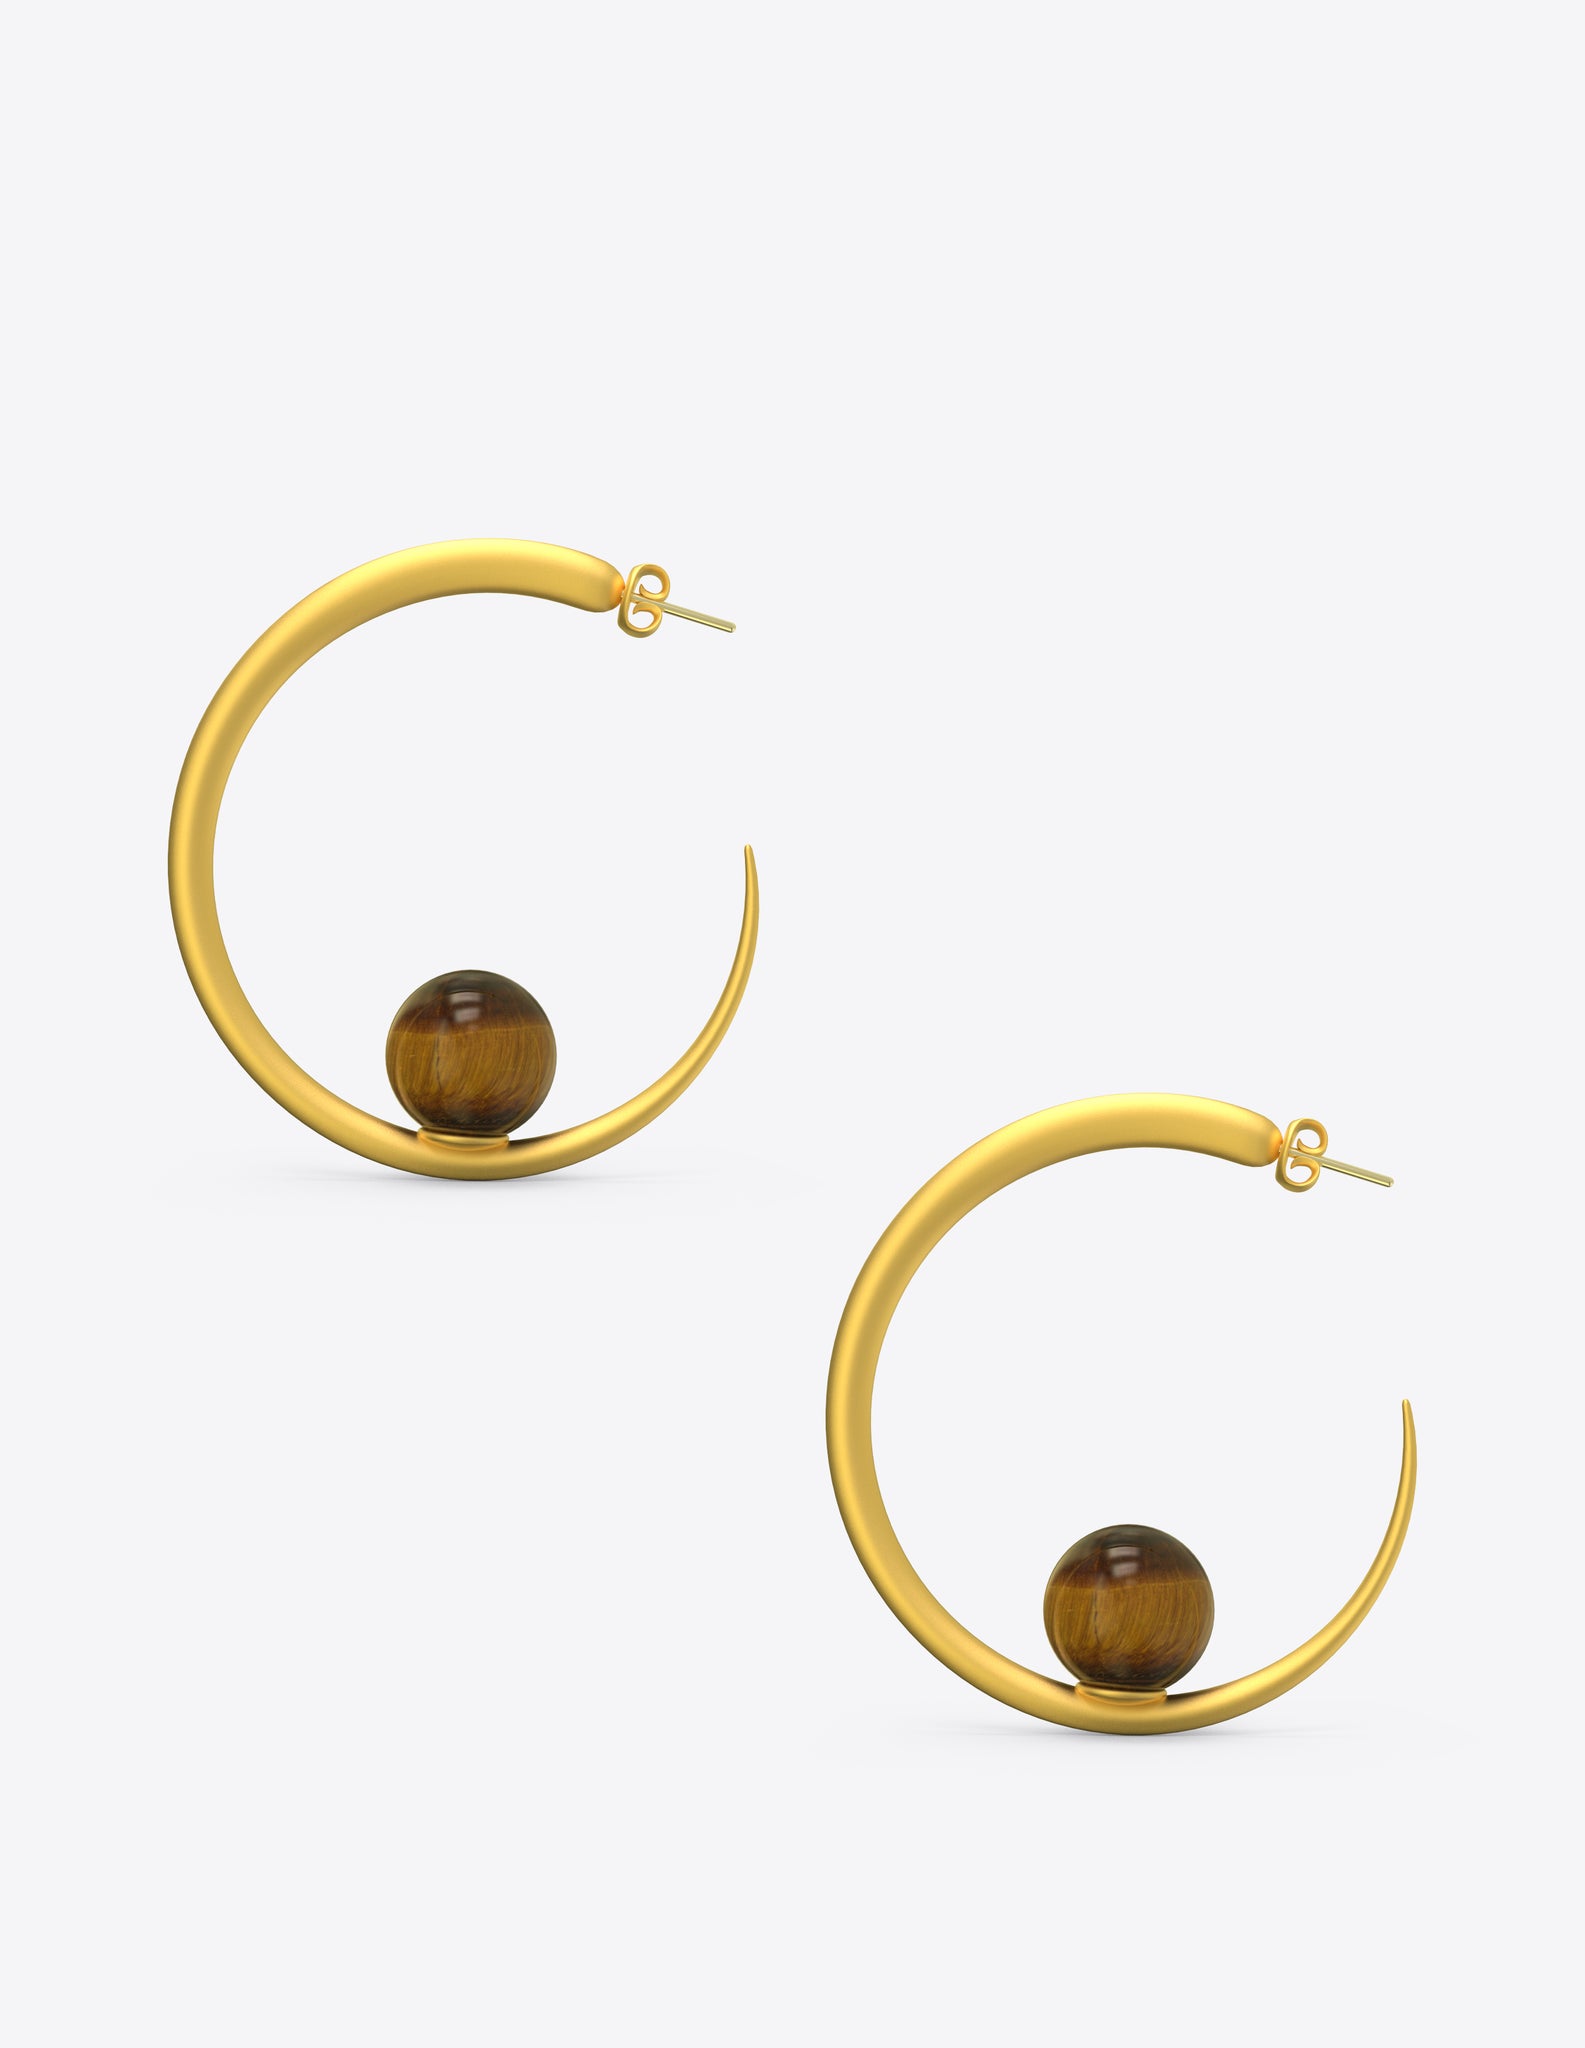 Isha Hoops in Matte Gold Vermeil with Tiger Eye